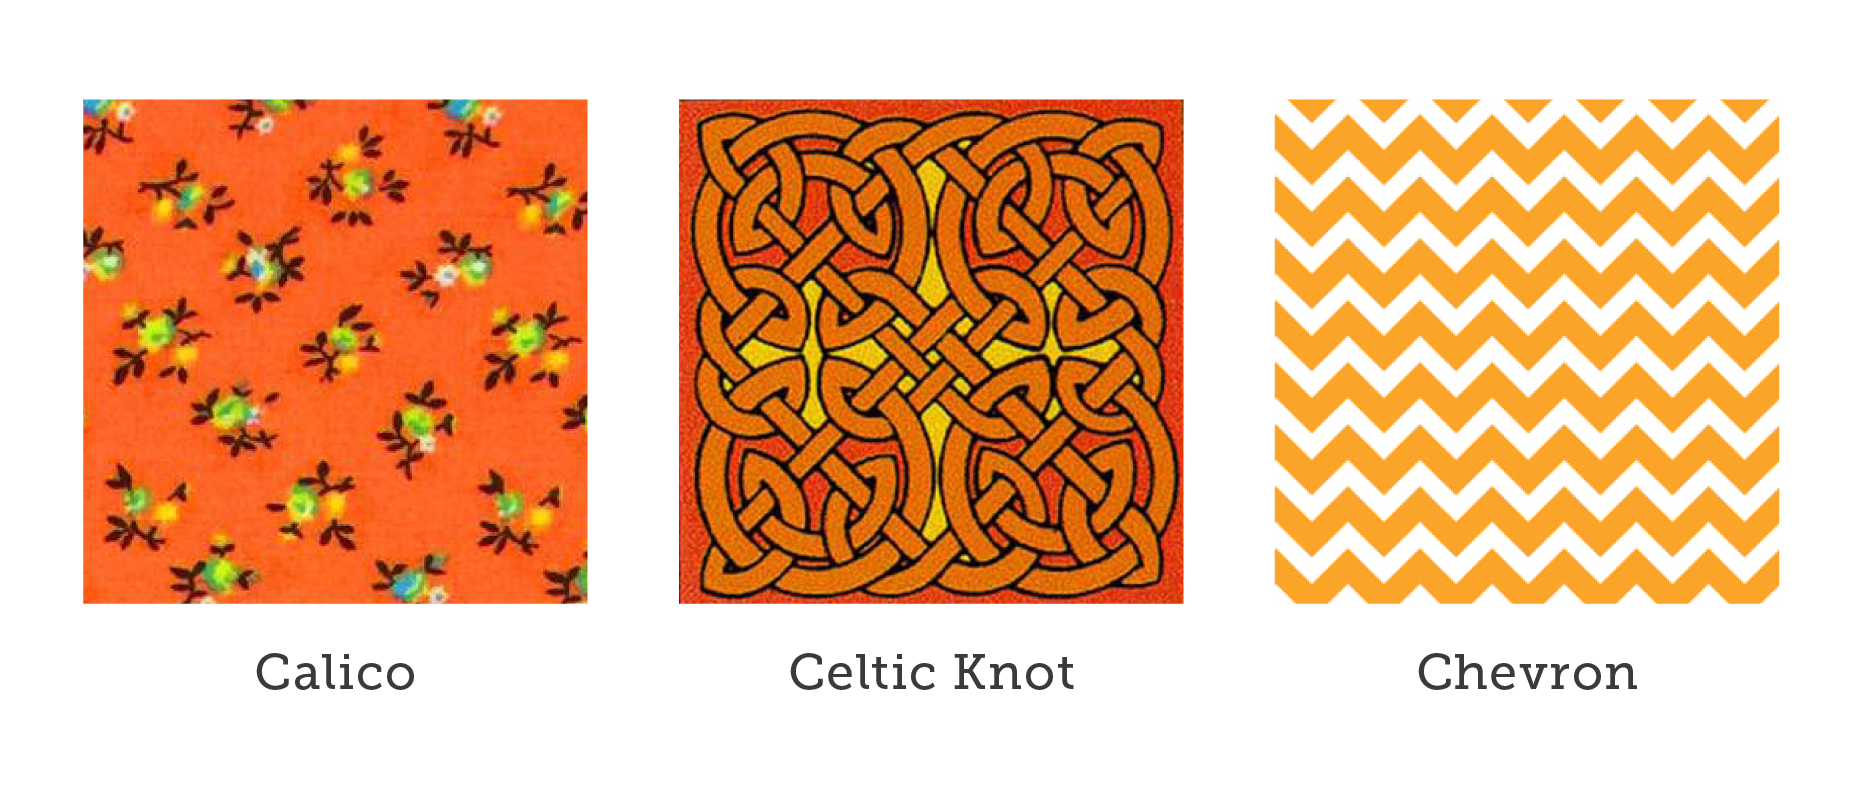 Calico, celtic knot and chevron quilting patterns